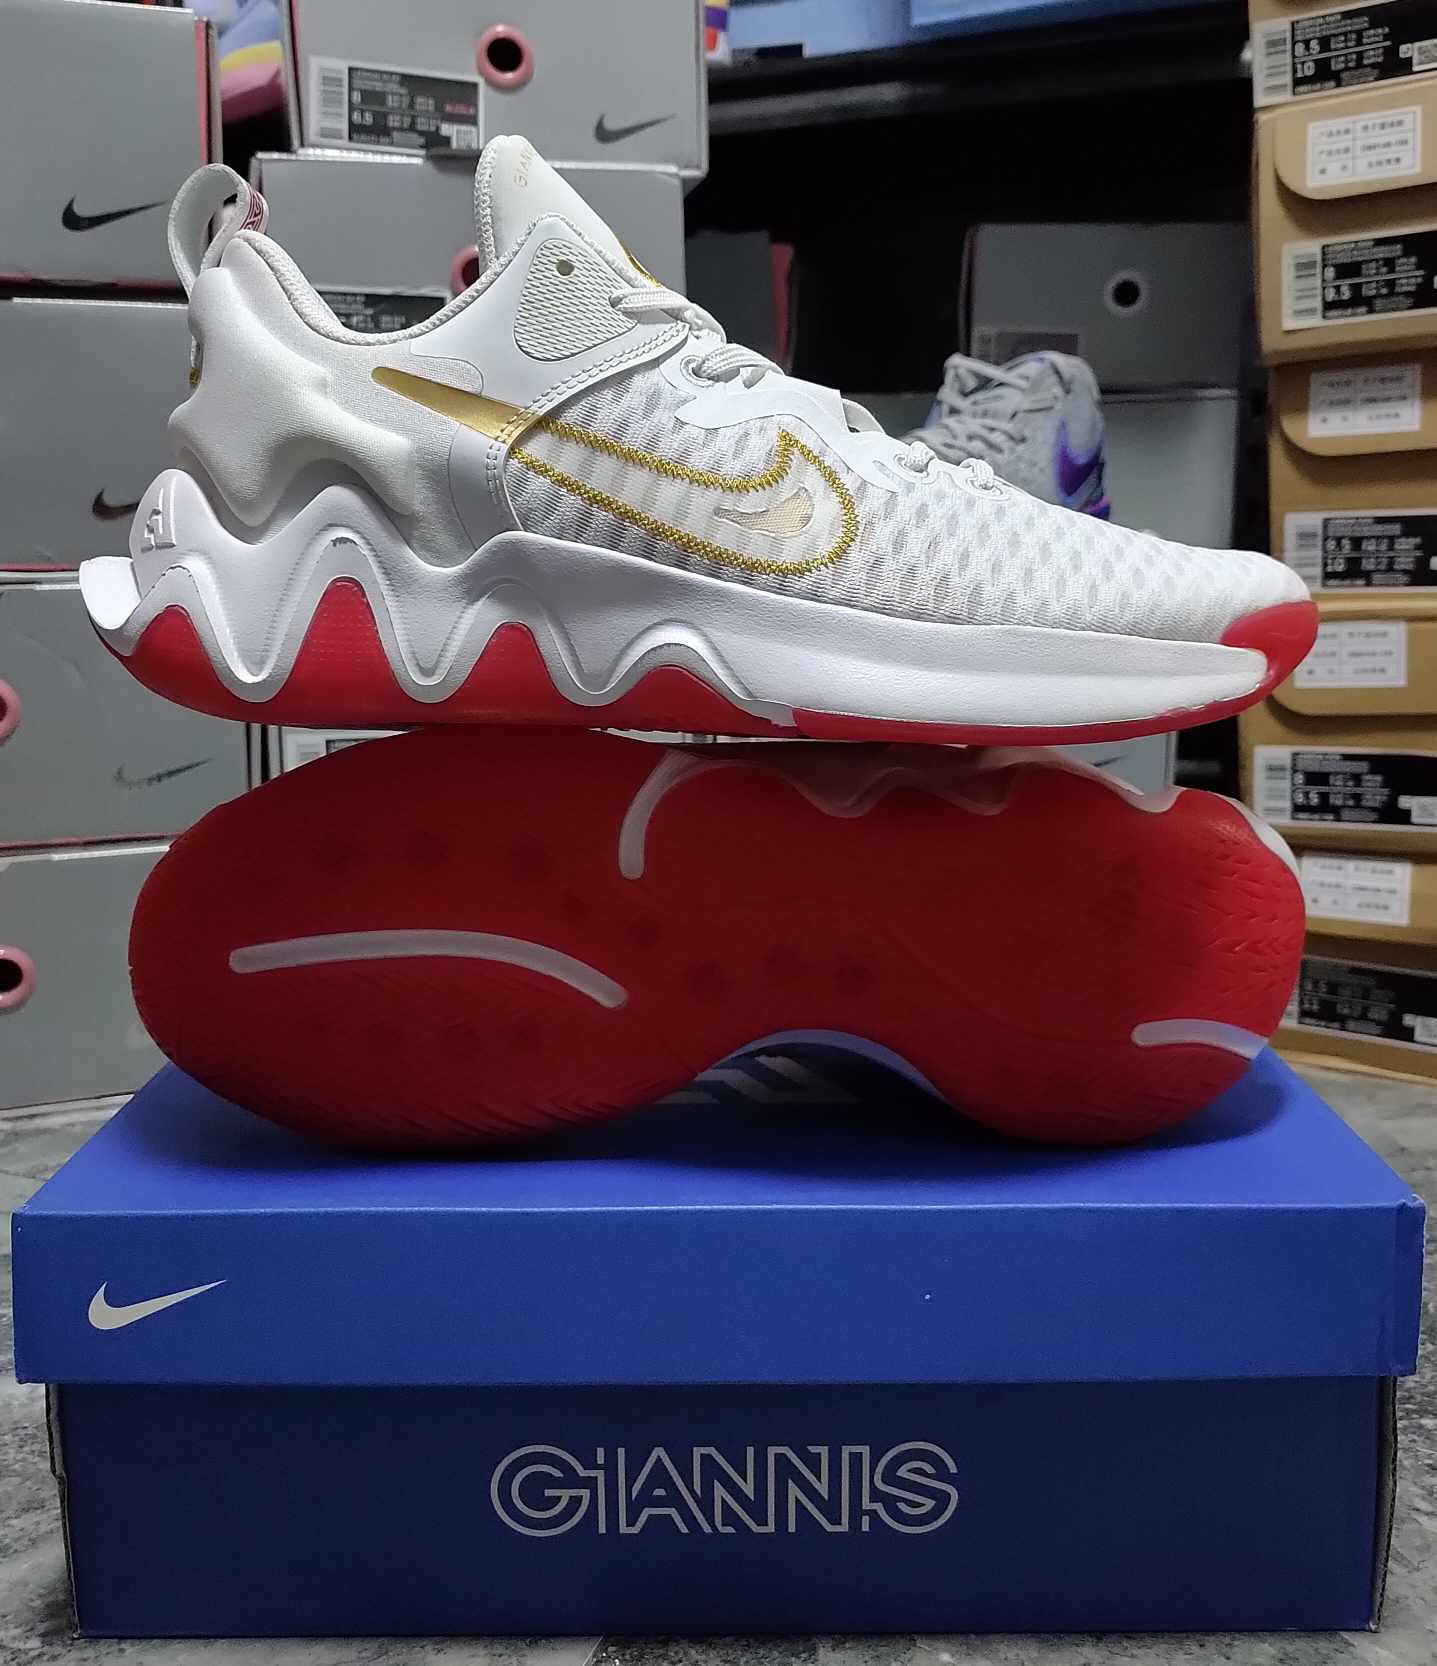 Giannis Immortality 1 "White Gold Red"